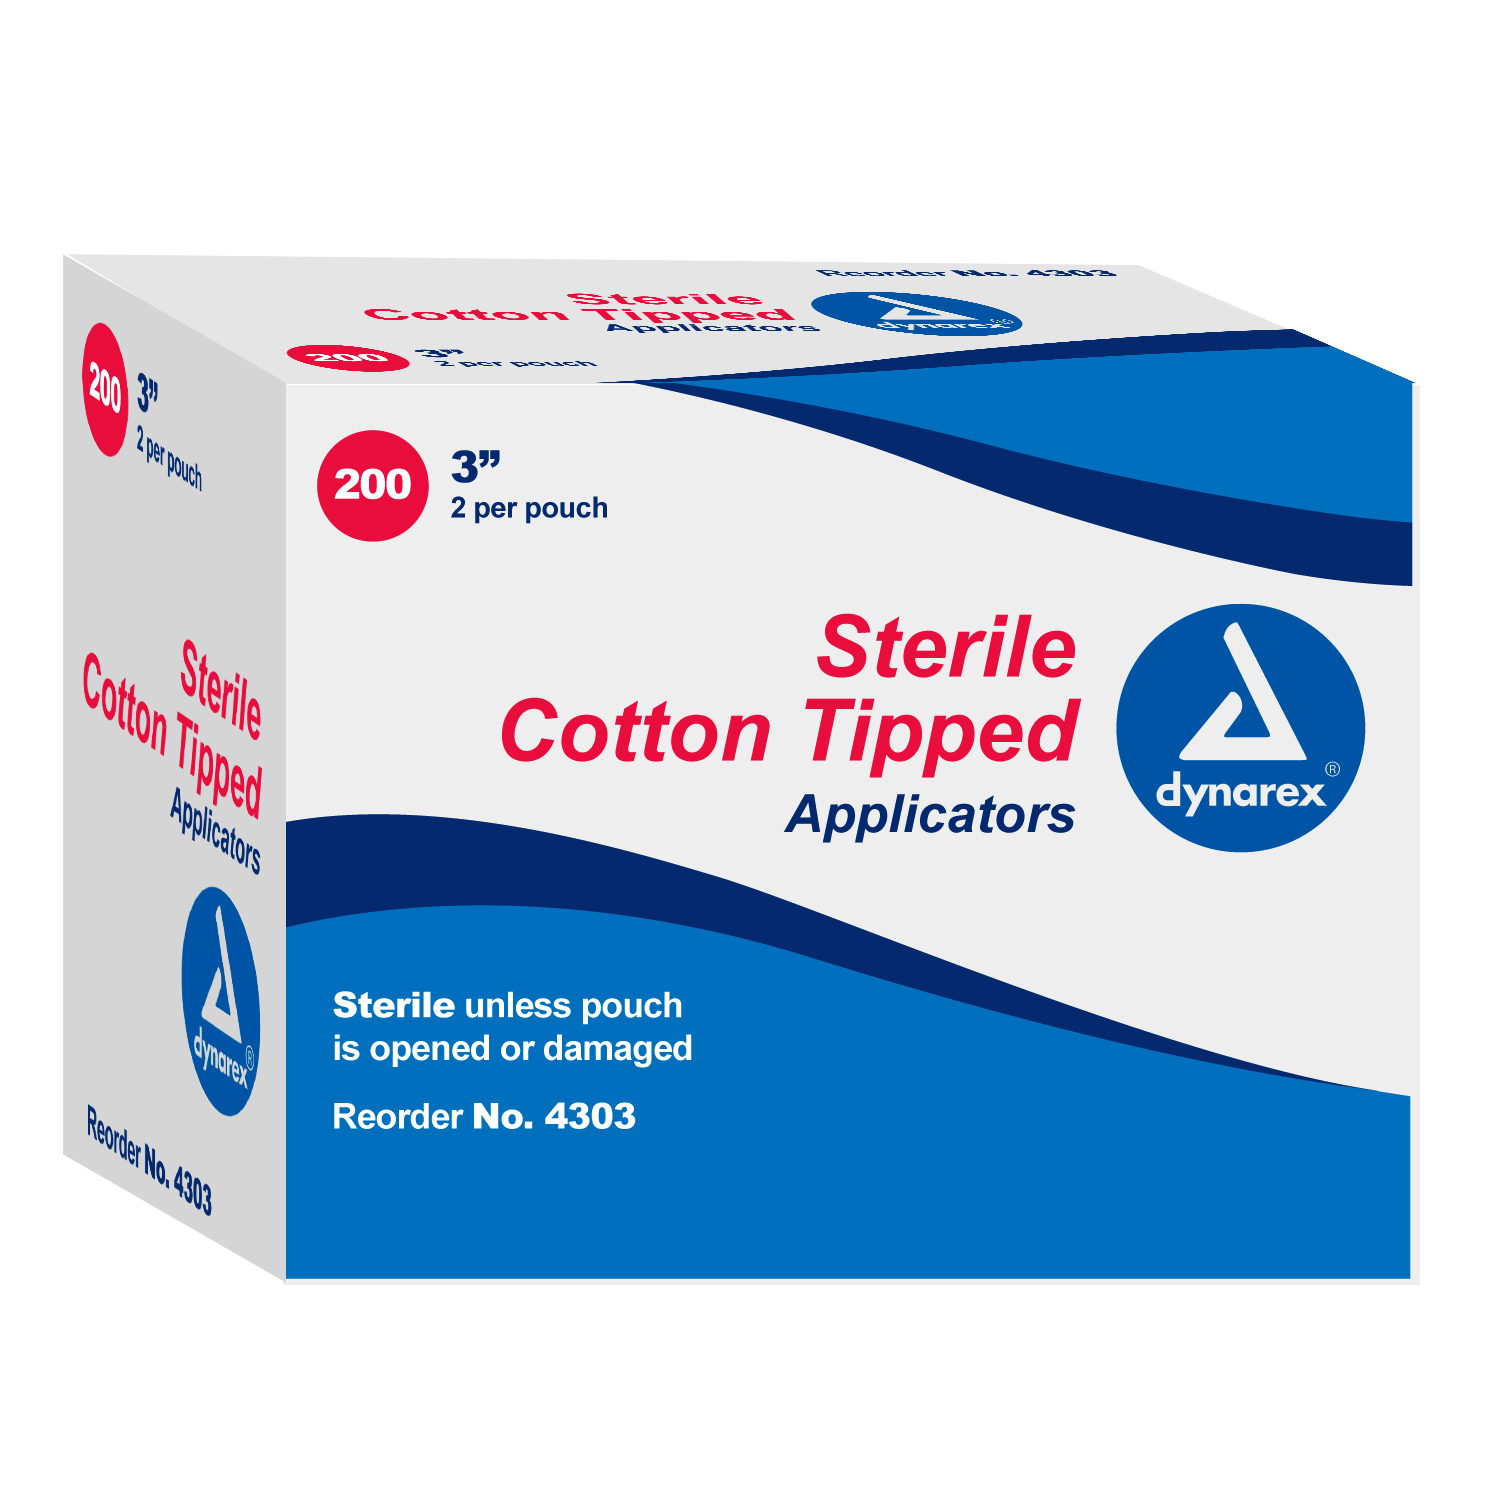 Sterile Cotton Tipped Applicators (Bag of 200) image